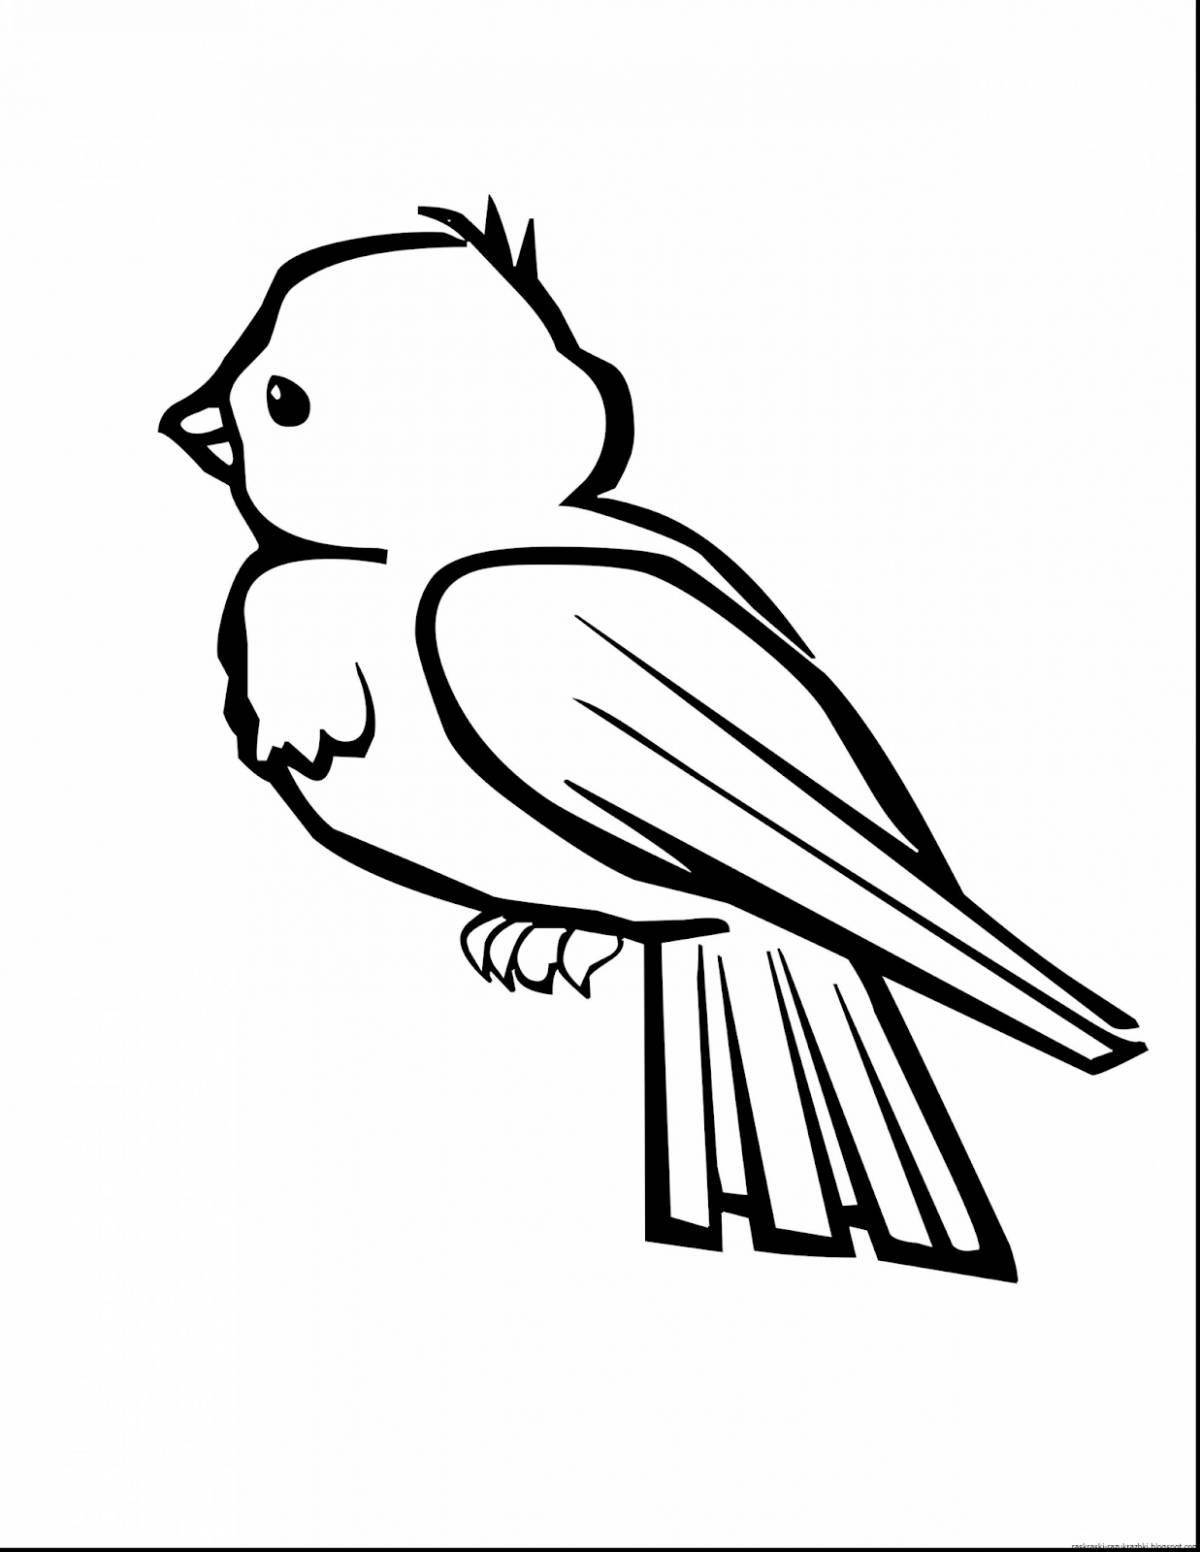 Colouring bright sparrow for children